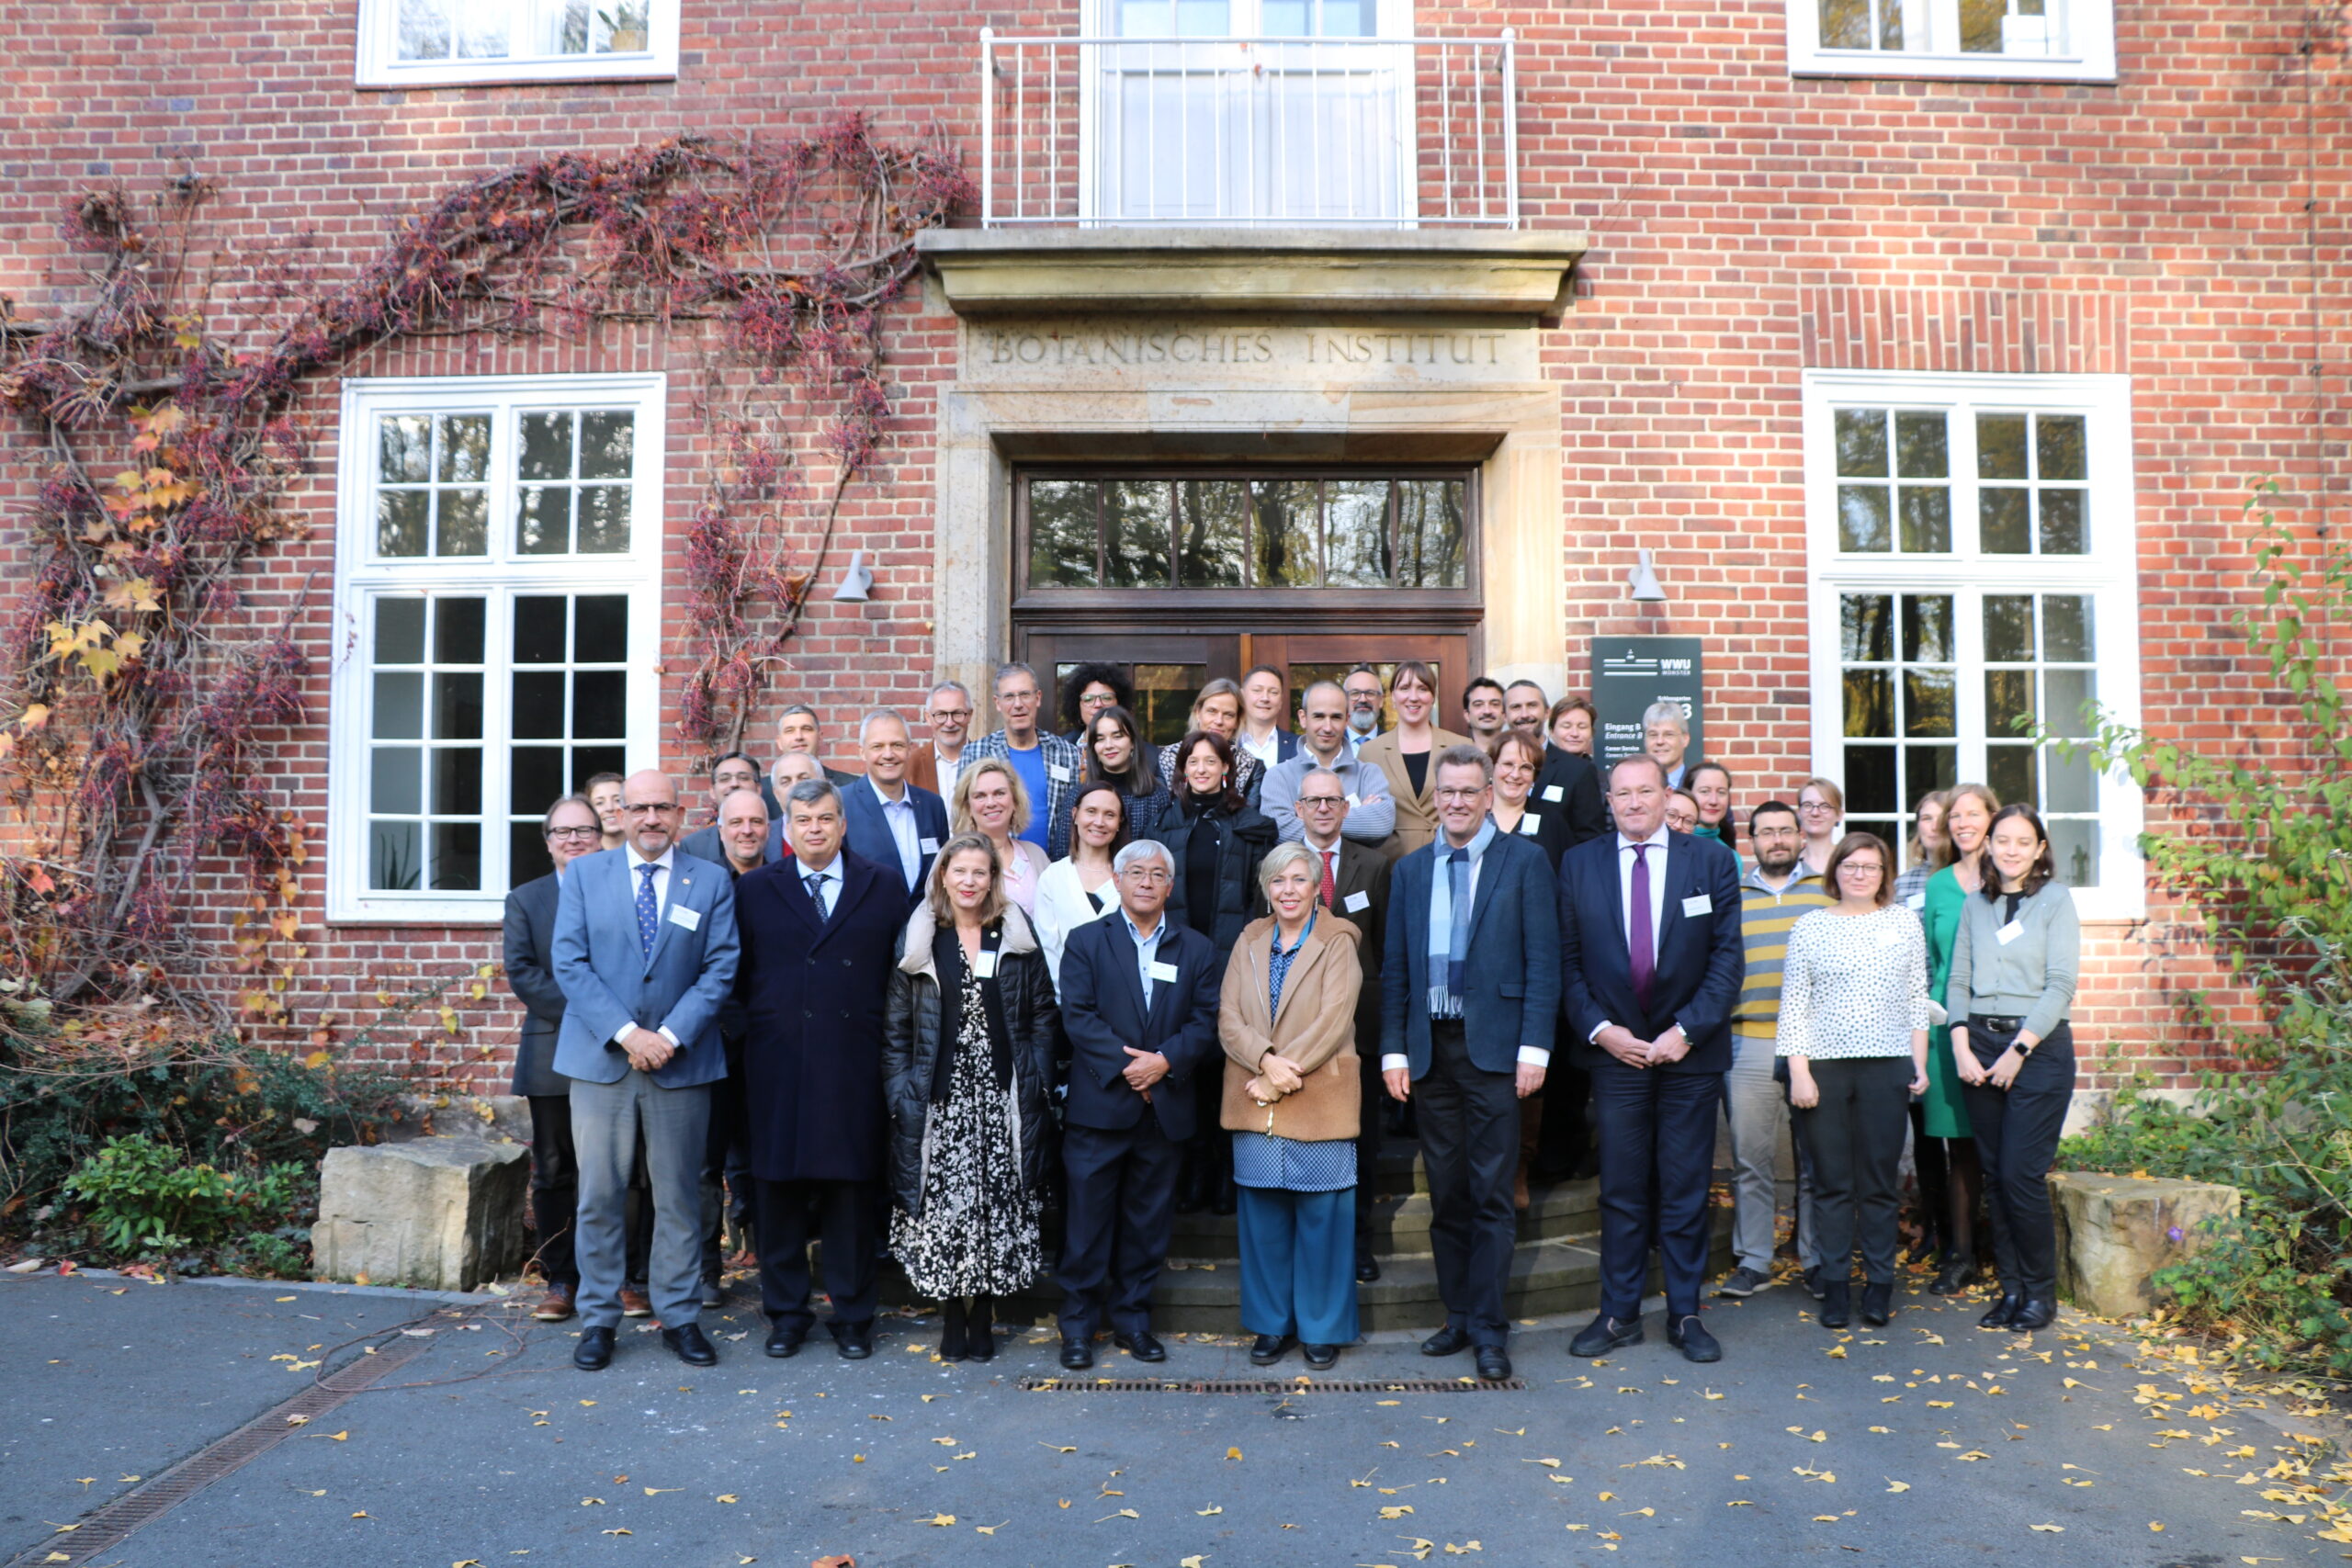 Participants of the meeting in Münster